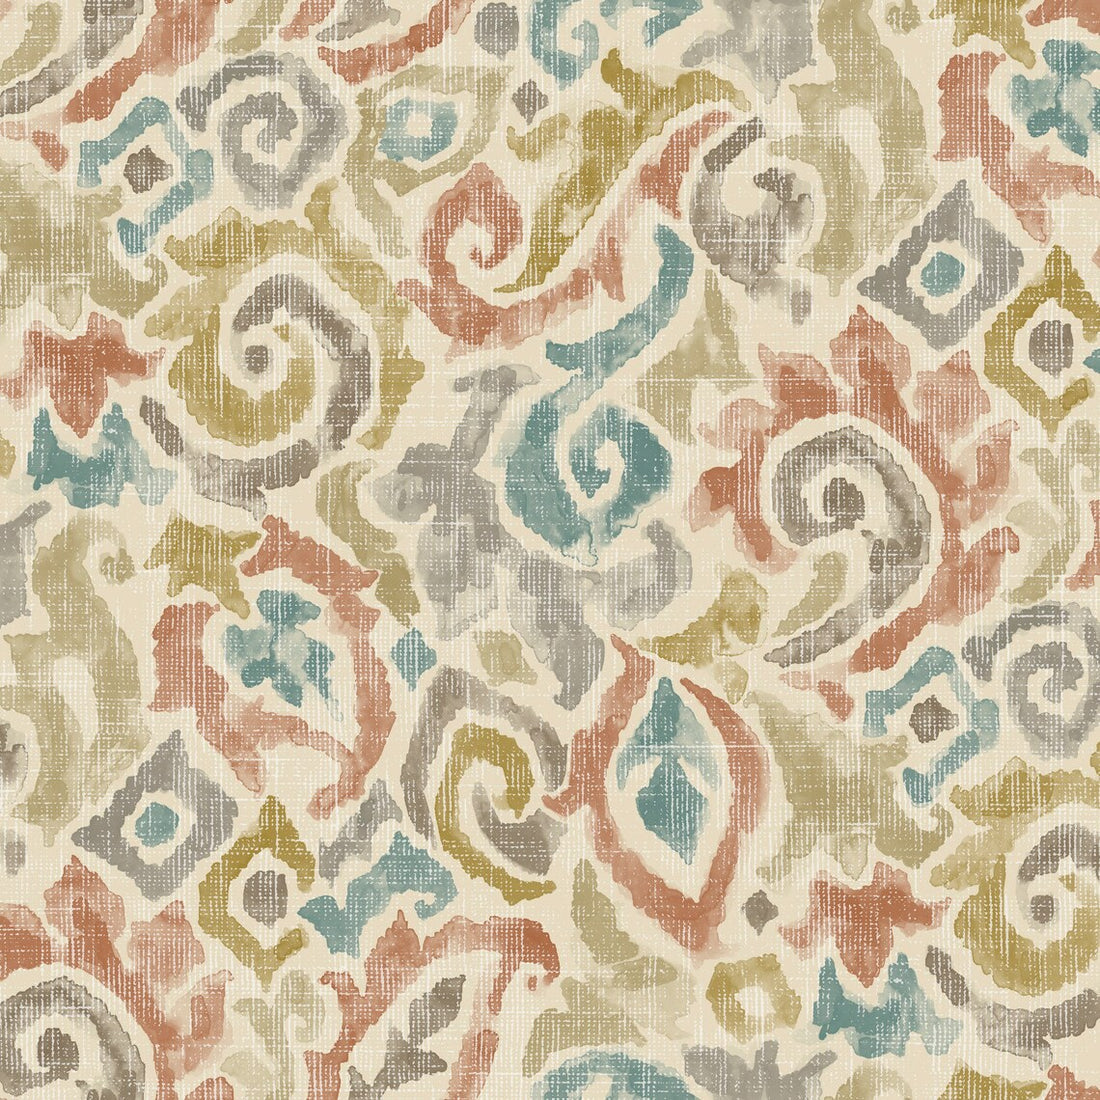 pinch pleated curtain panels pair in Jester Tuscan Paisley Watercolor- Blue, Terracotta, Gray, Tan